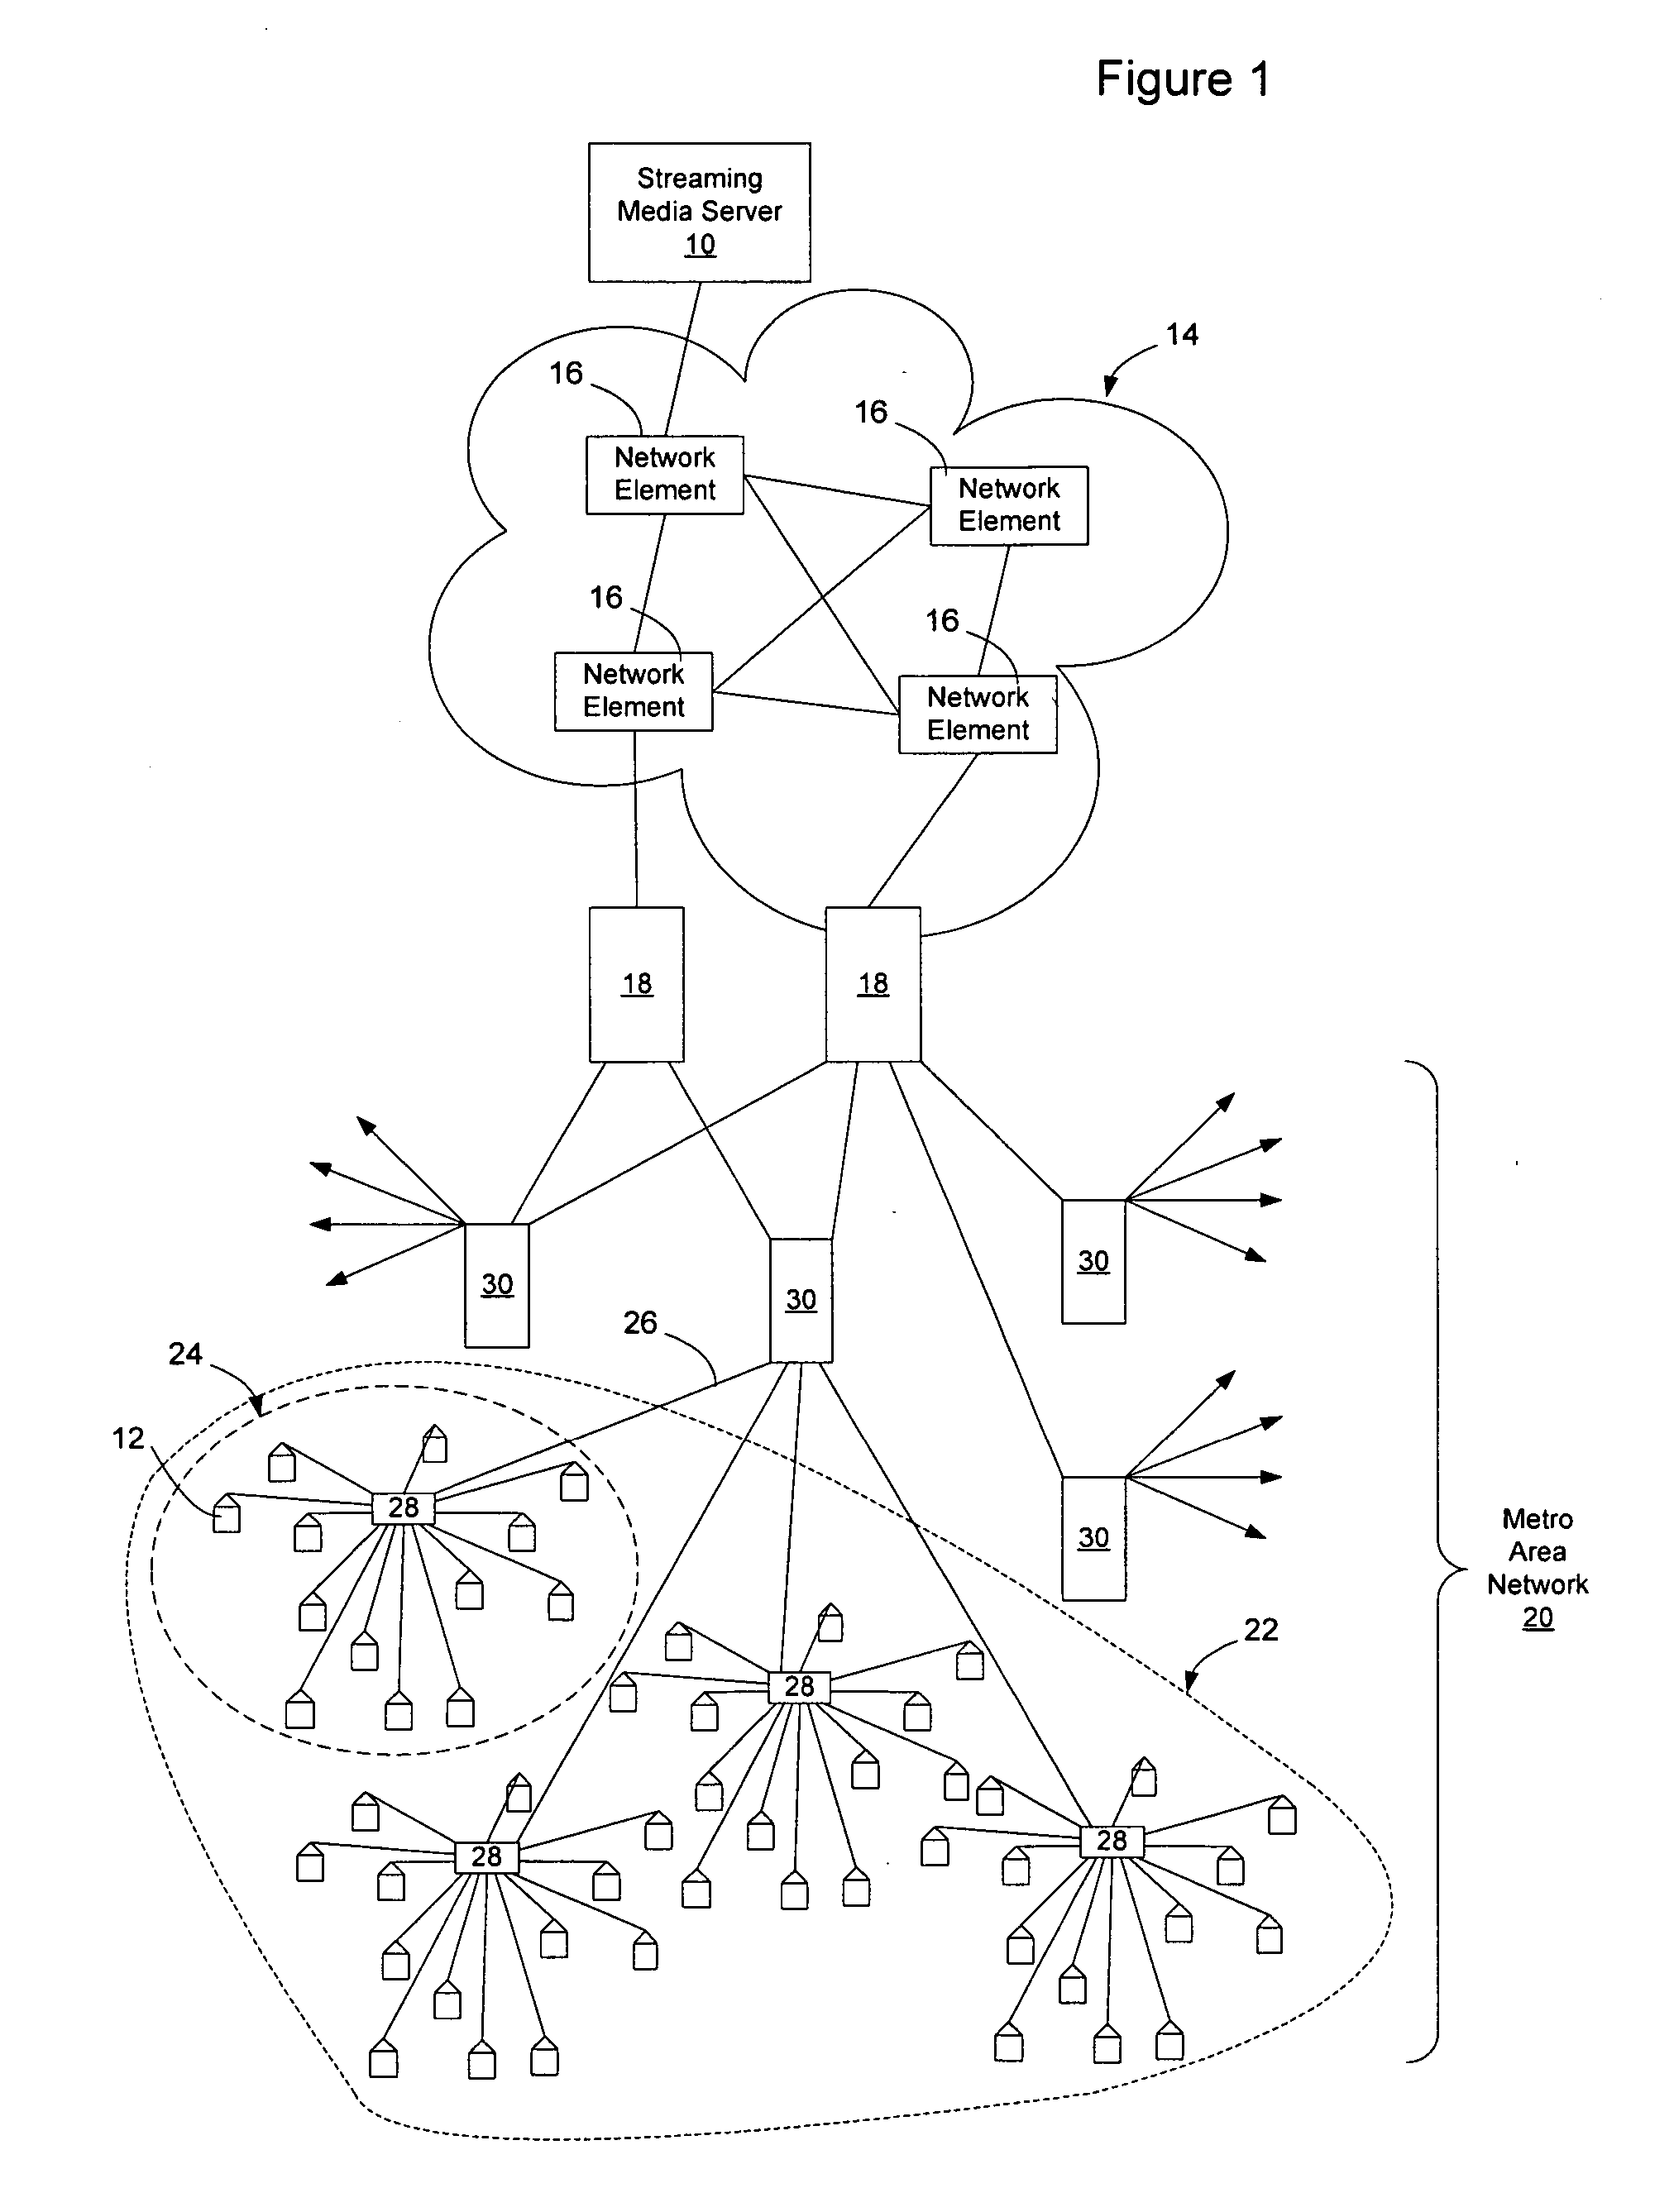 Method and apparatus for live streaming media replication in a communication network